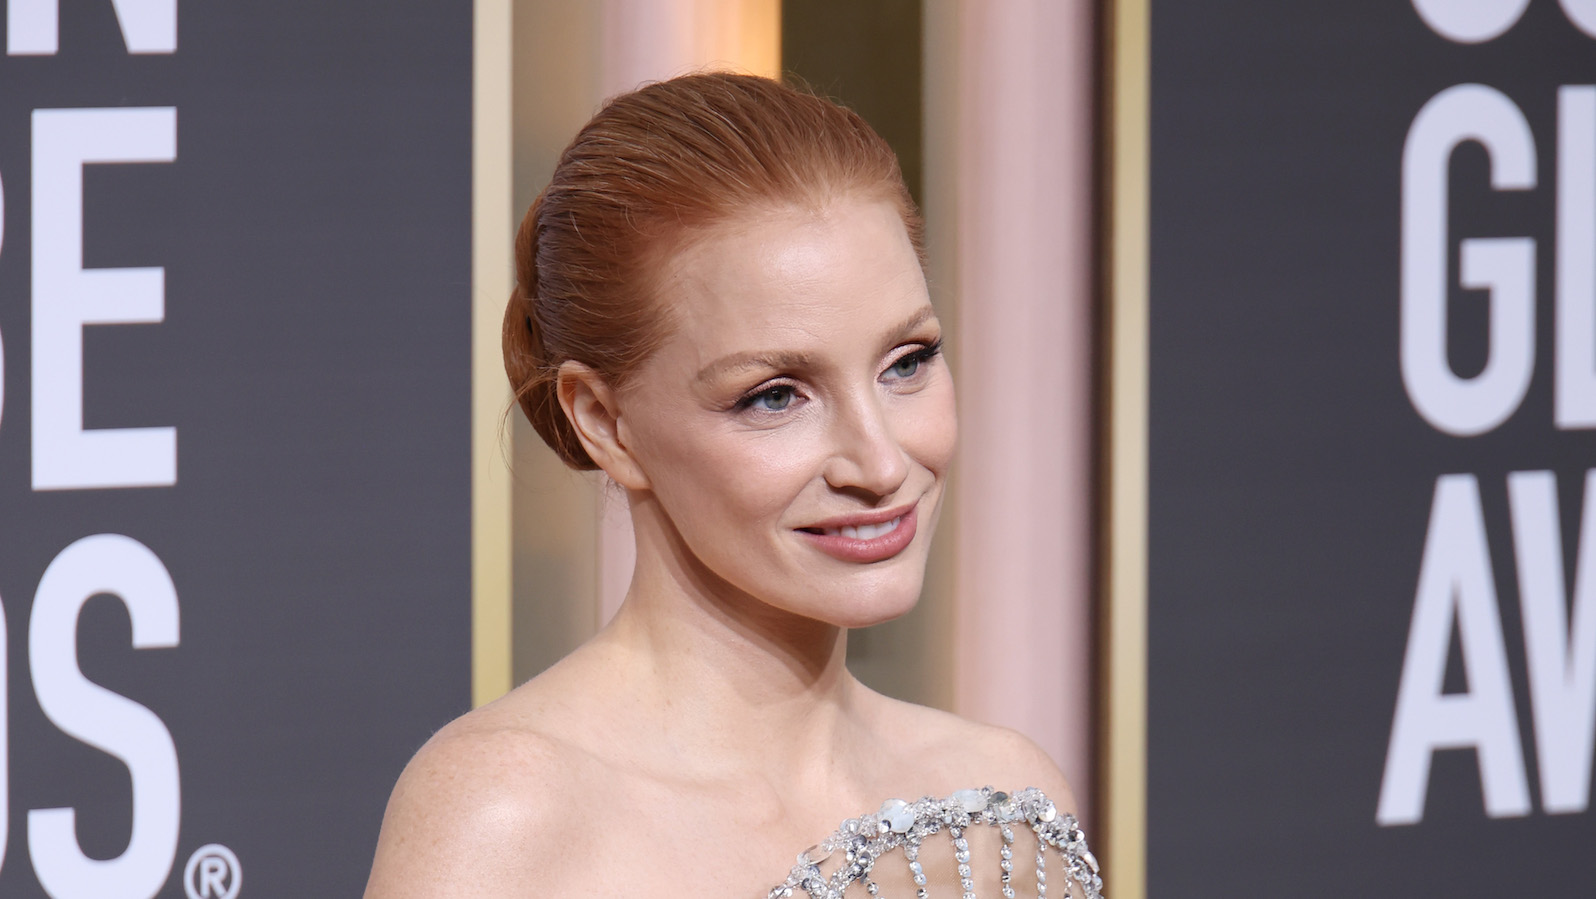 Jessica Chastain makes the case for a ‘Madame Web’ role in sparkling spider web dress